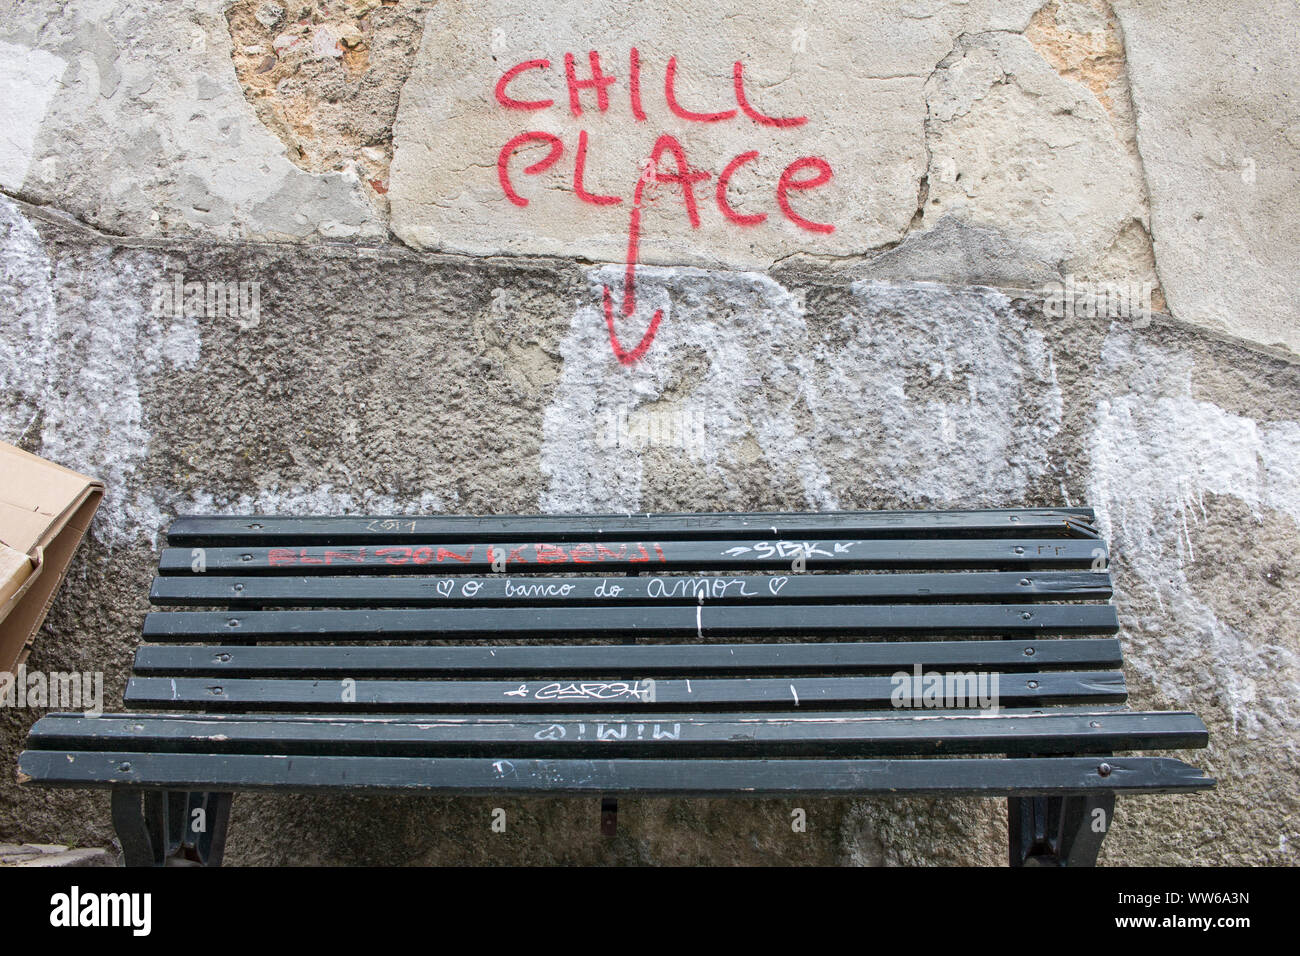 Bench labeled 'Chill Place' in Lisbon, Stock Photo